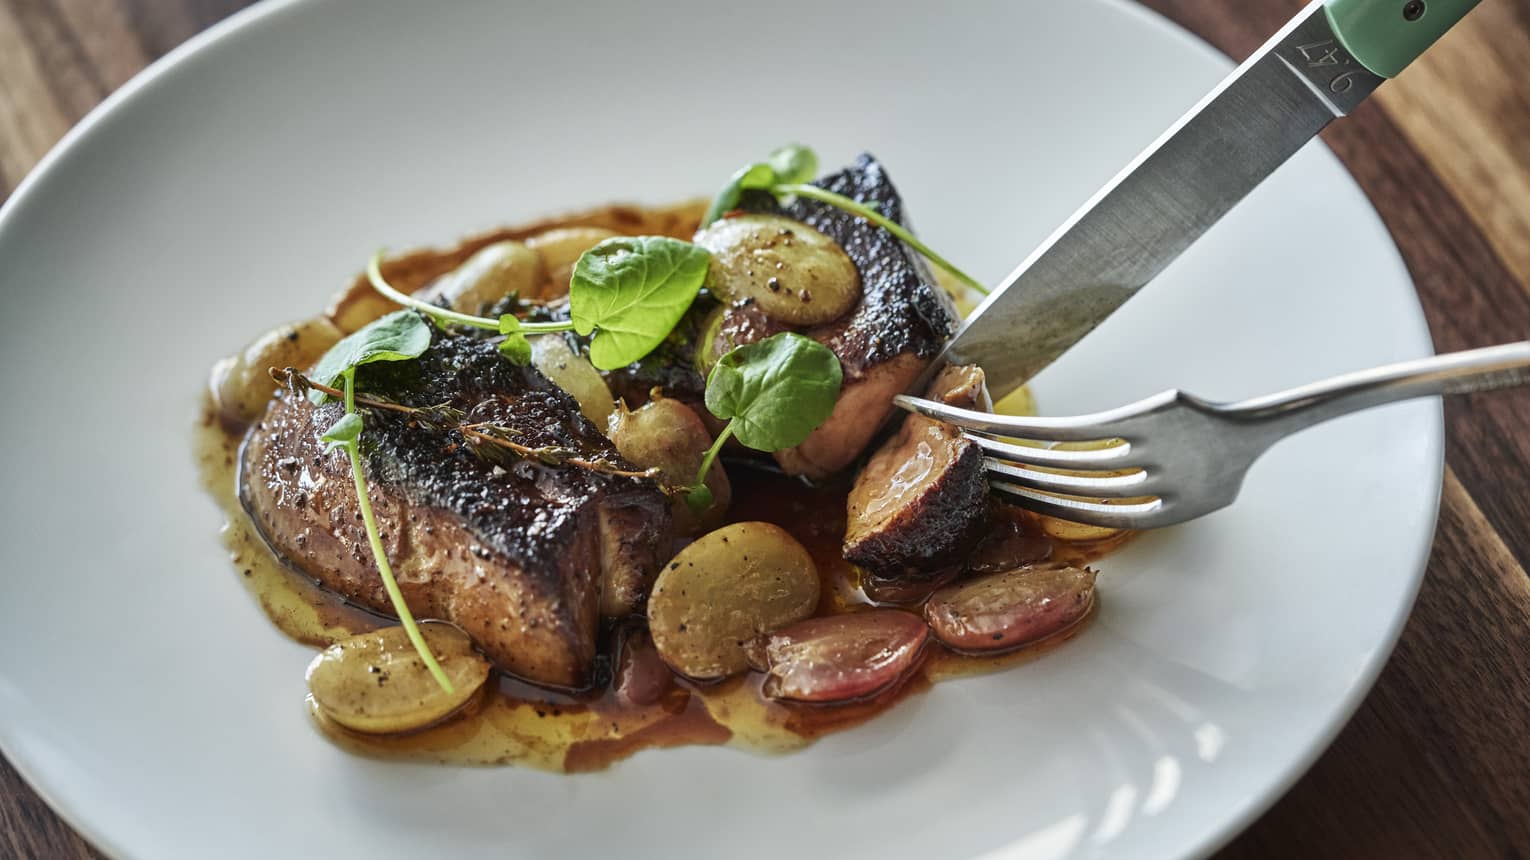 Pan-seared Foie Gras with Grapes, Cider and Verjus